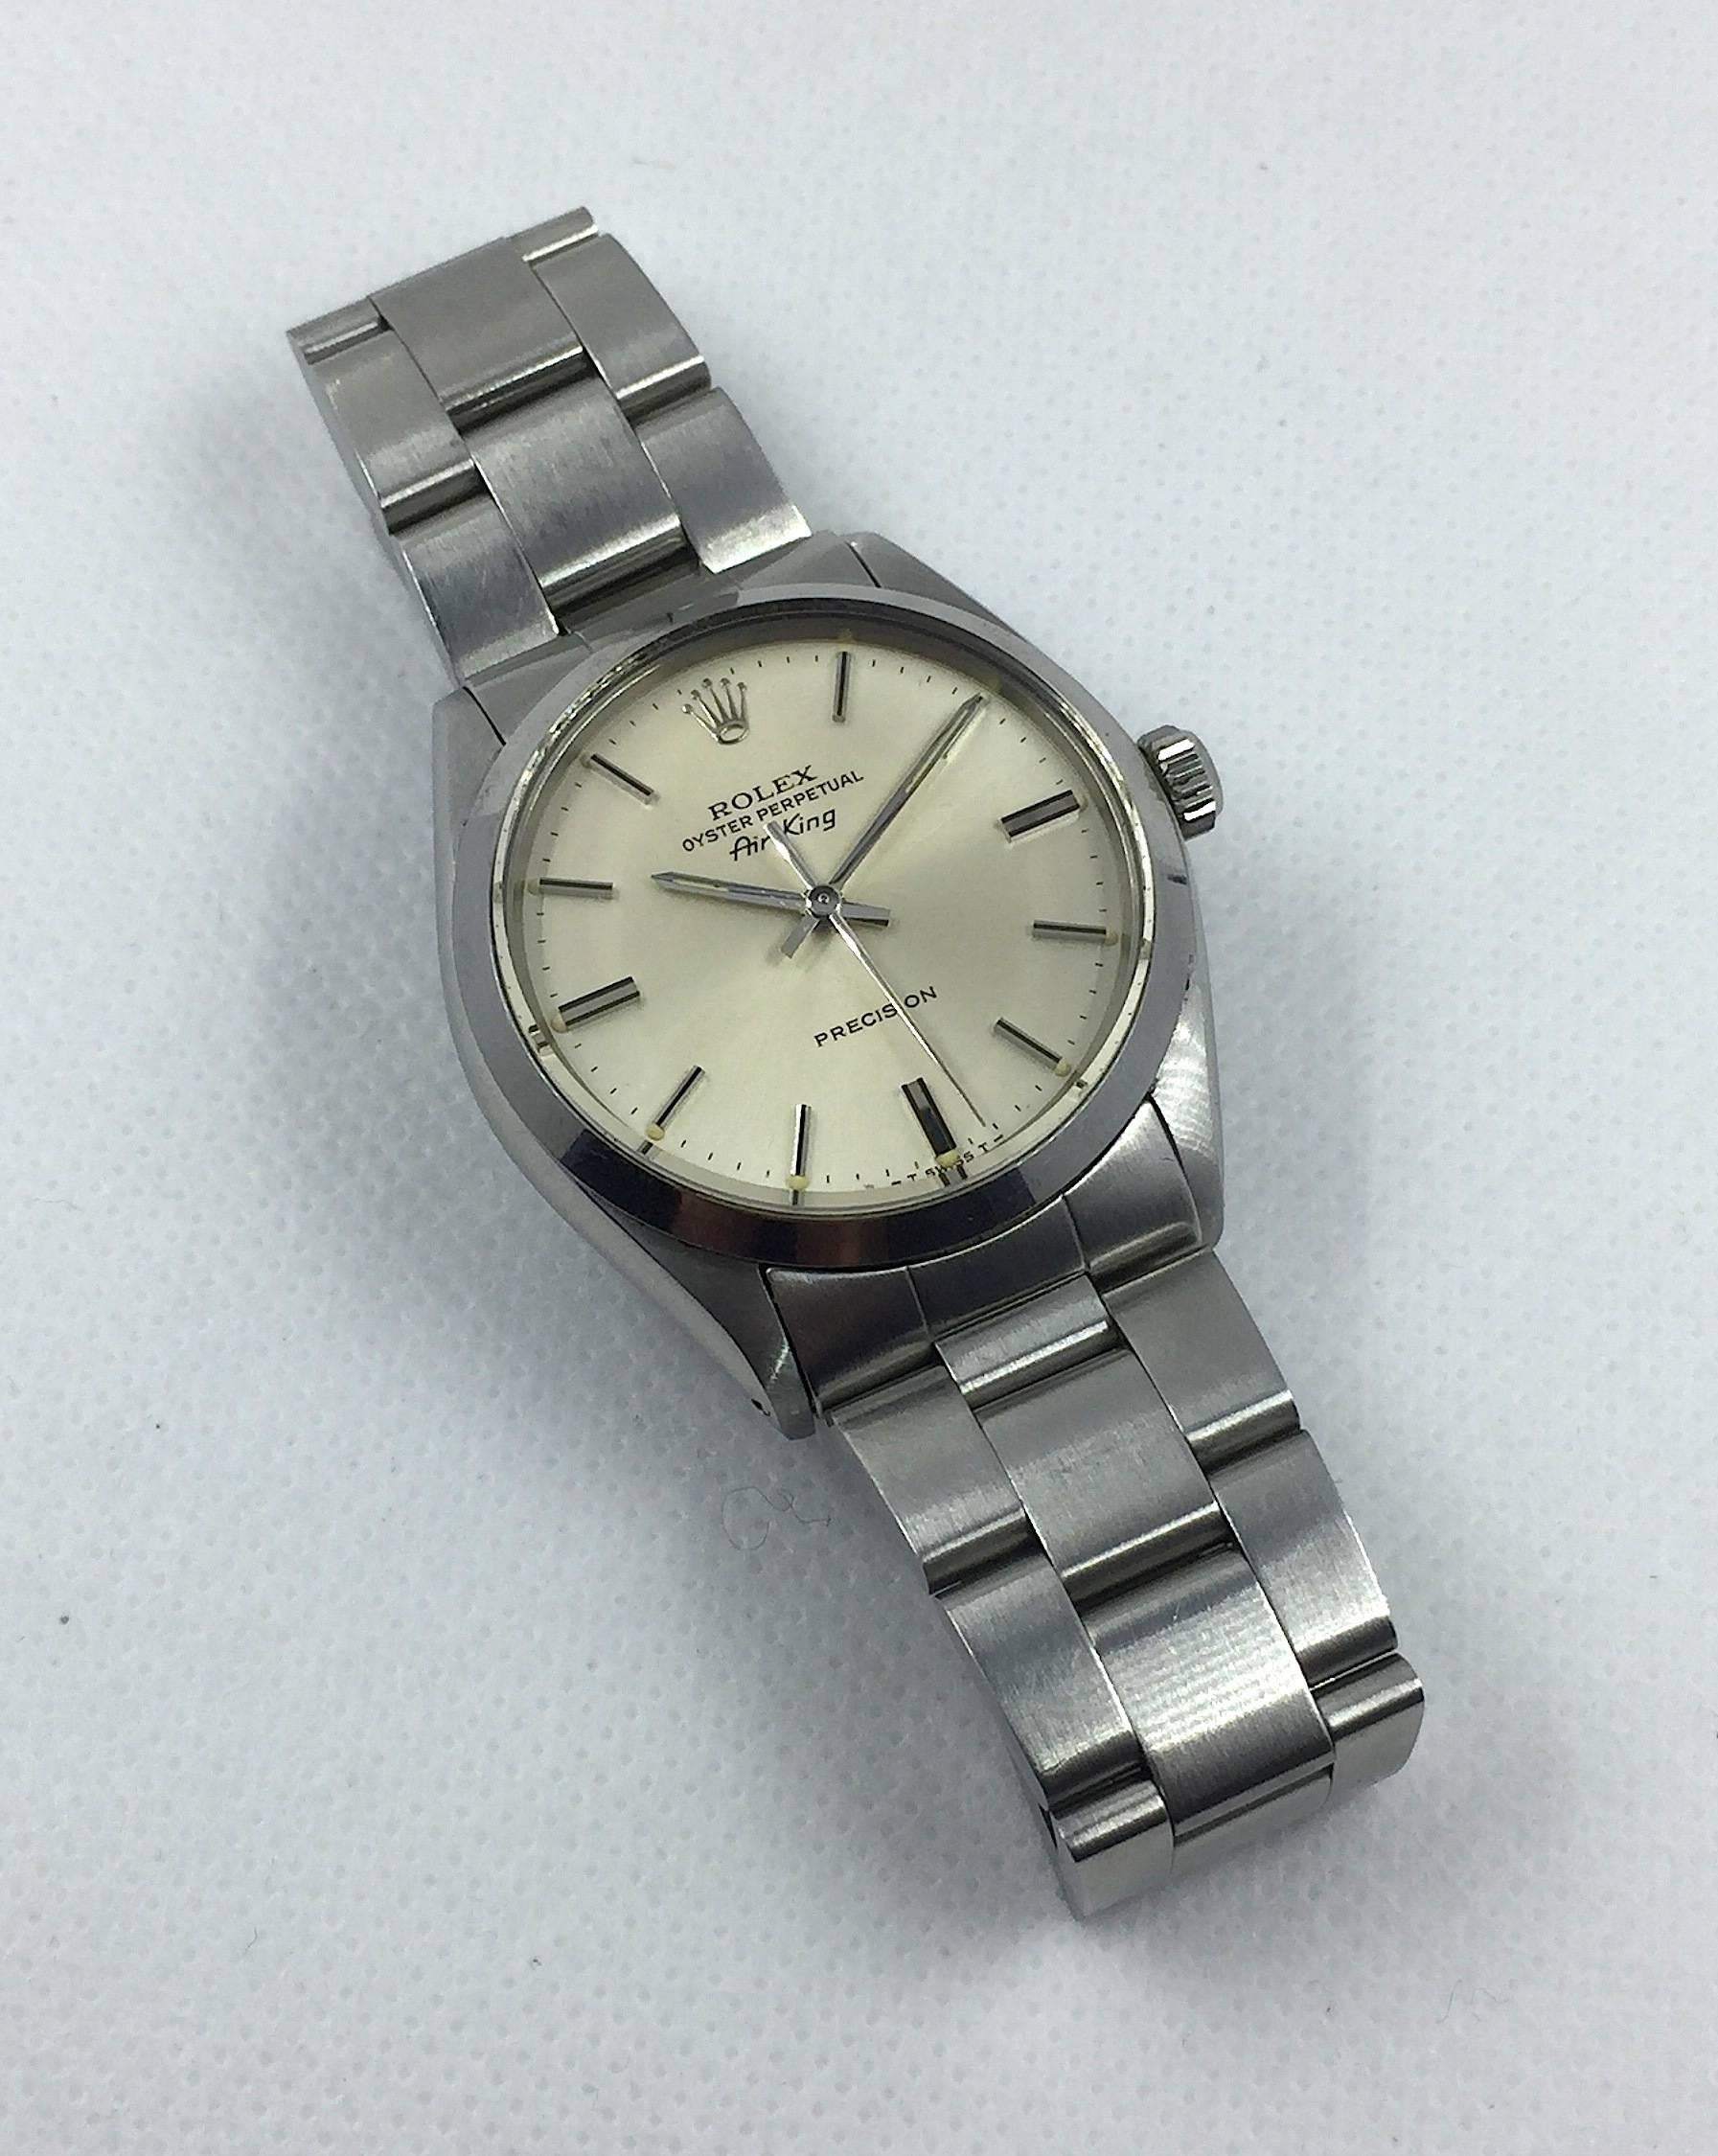 Rolex Stainless Steel Oyster Perpetual Air-King Wristwatch
Factory Silvered Dial with Applied Hour Markers
Stainless Steel Smooth Bezel
34mm in size 
Rolex 1500 Base Calibre Automatic Movement
Acrylic Crystal
Early 1980's Production
Comes Fitted on